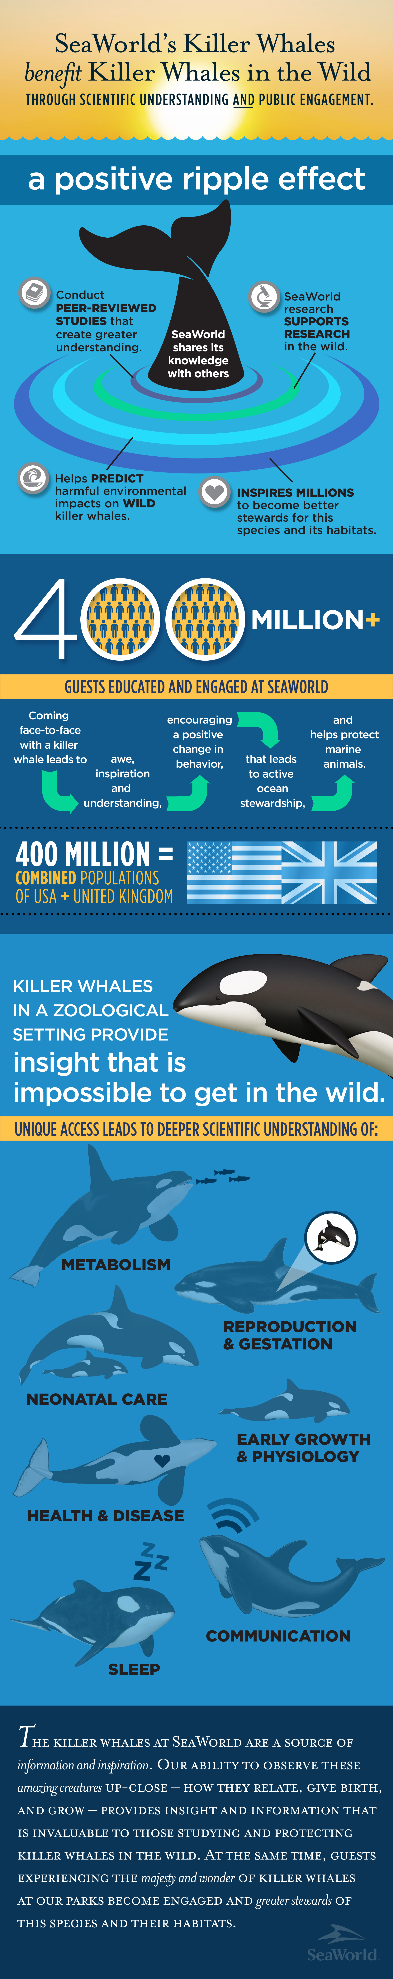 Infographic: SeaWorlds Killer Whales Benefit Killer Whales in the Wild 